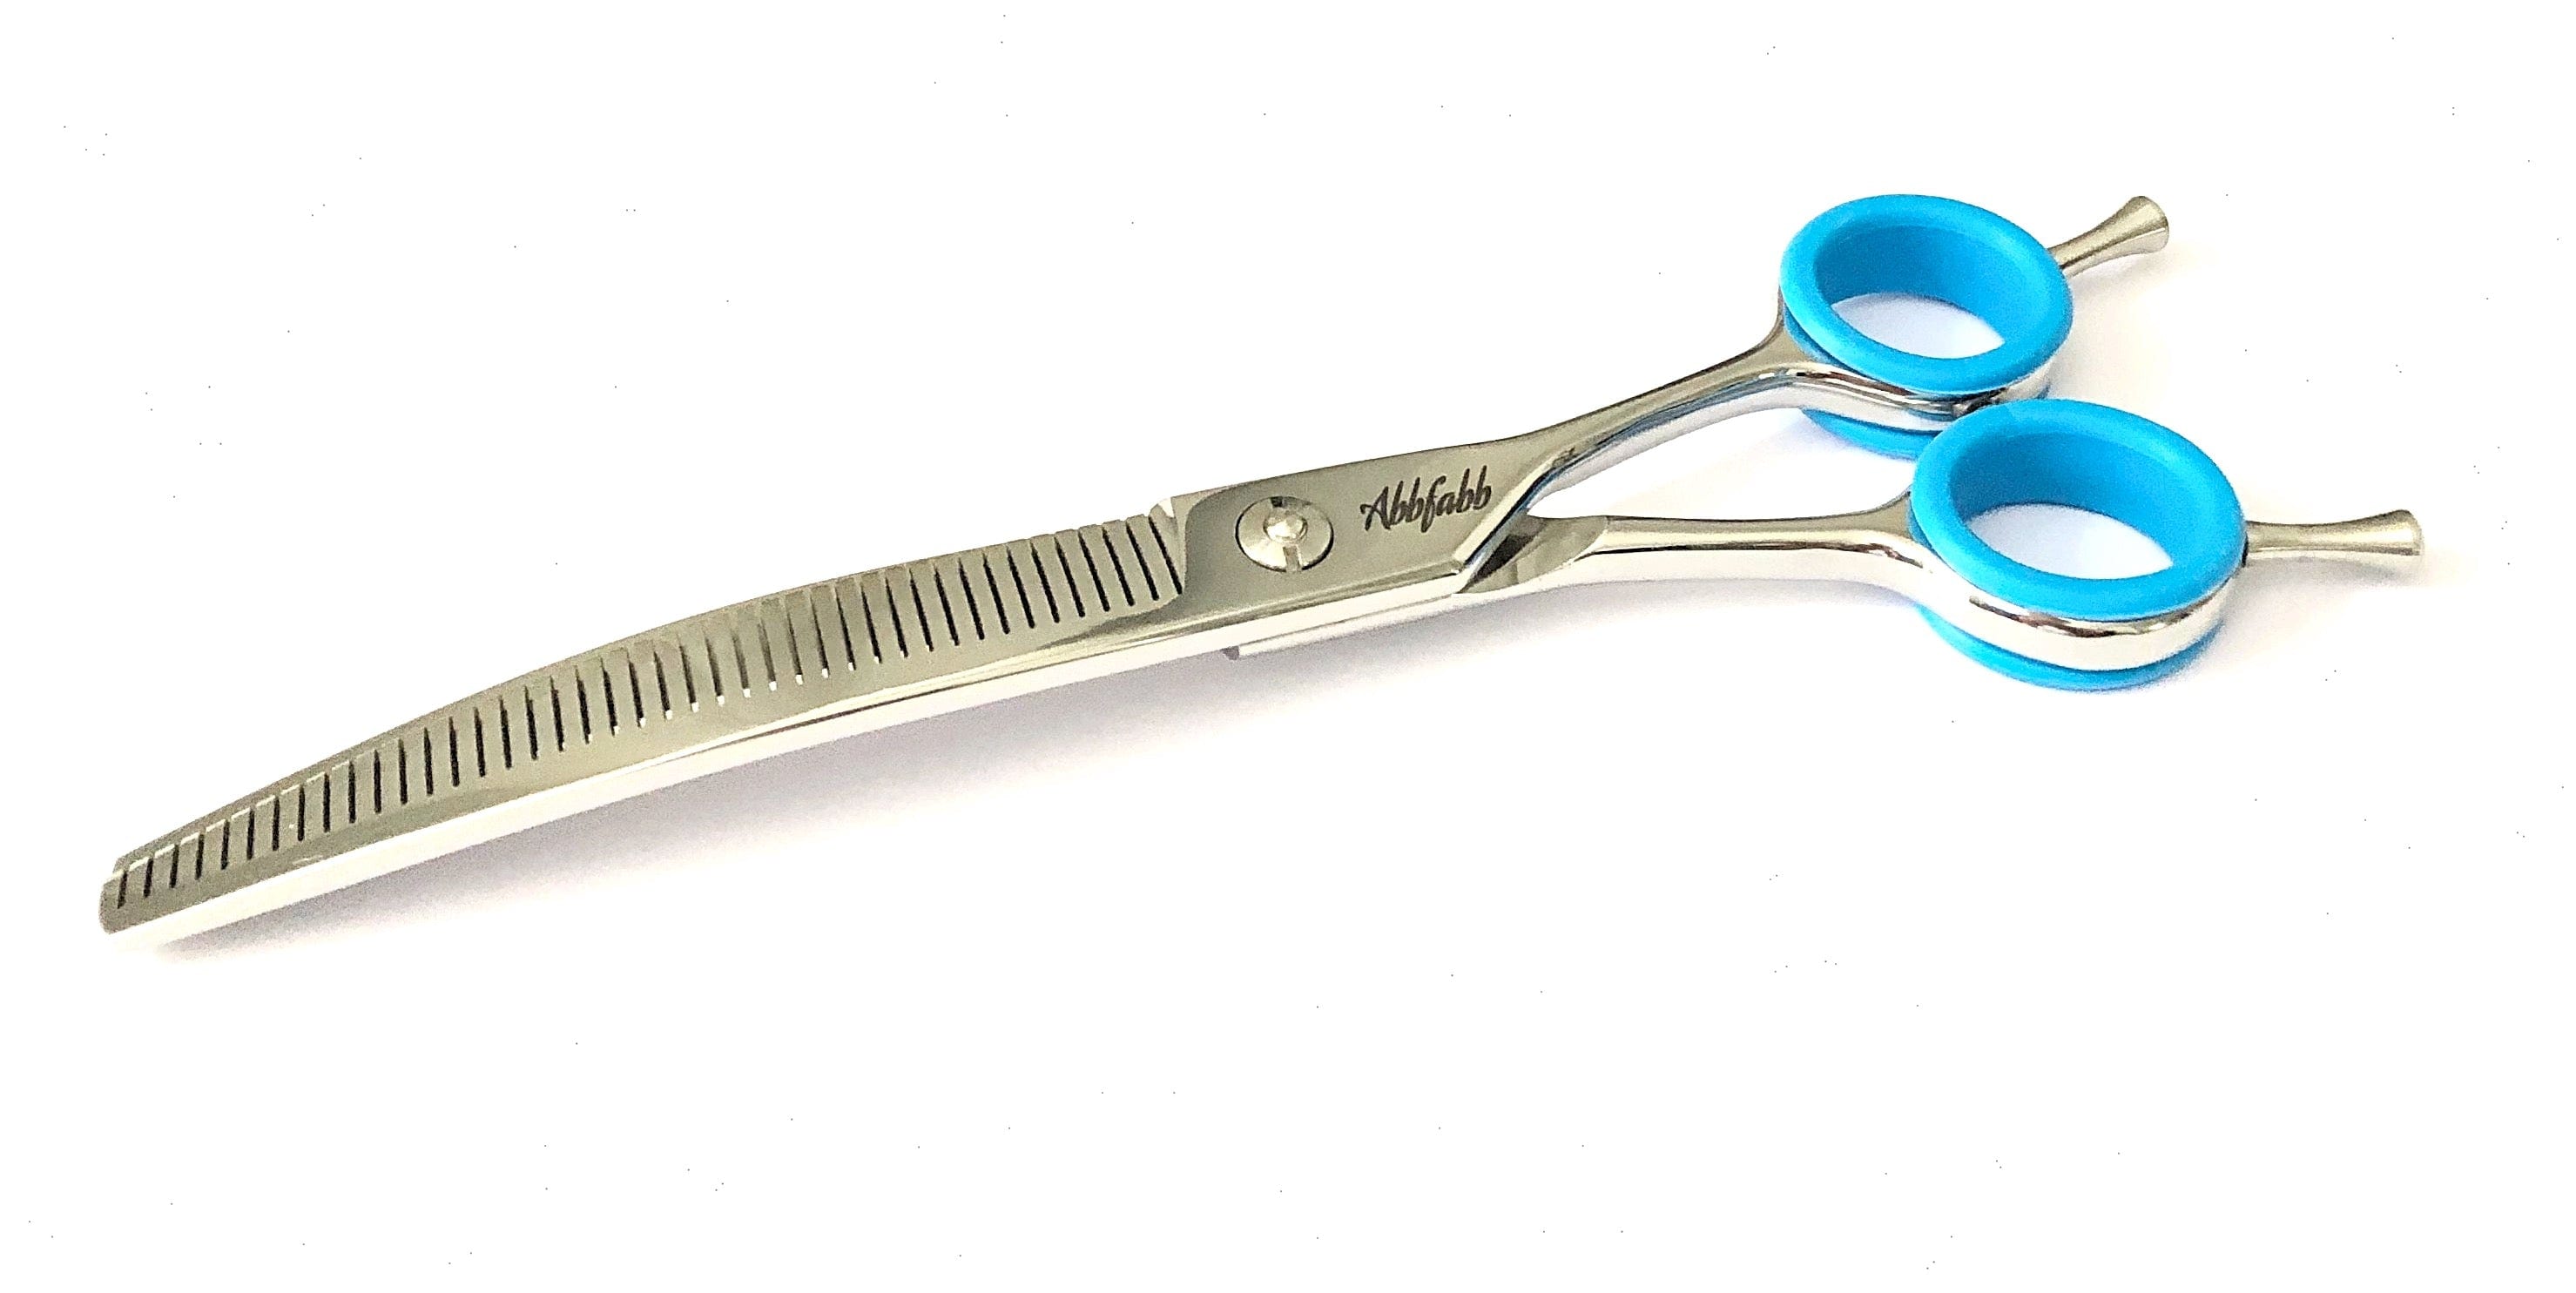 Abbfabb Grooming Scissors Ltd 7" 40 Piano Teeth Reversible Curved Thinning Scissor. 7" Flippable curved fluffer